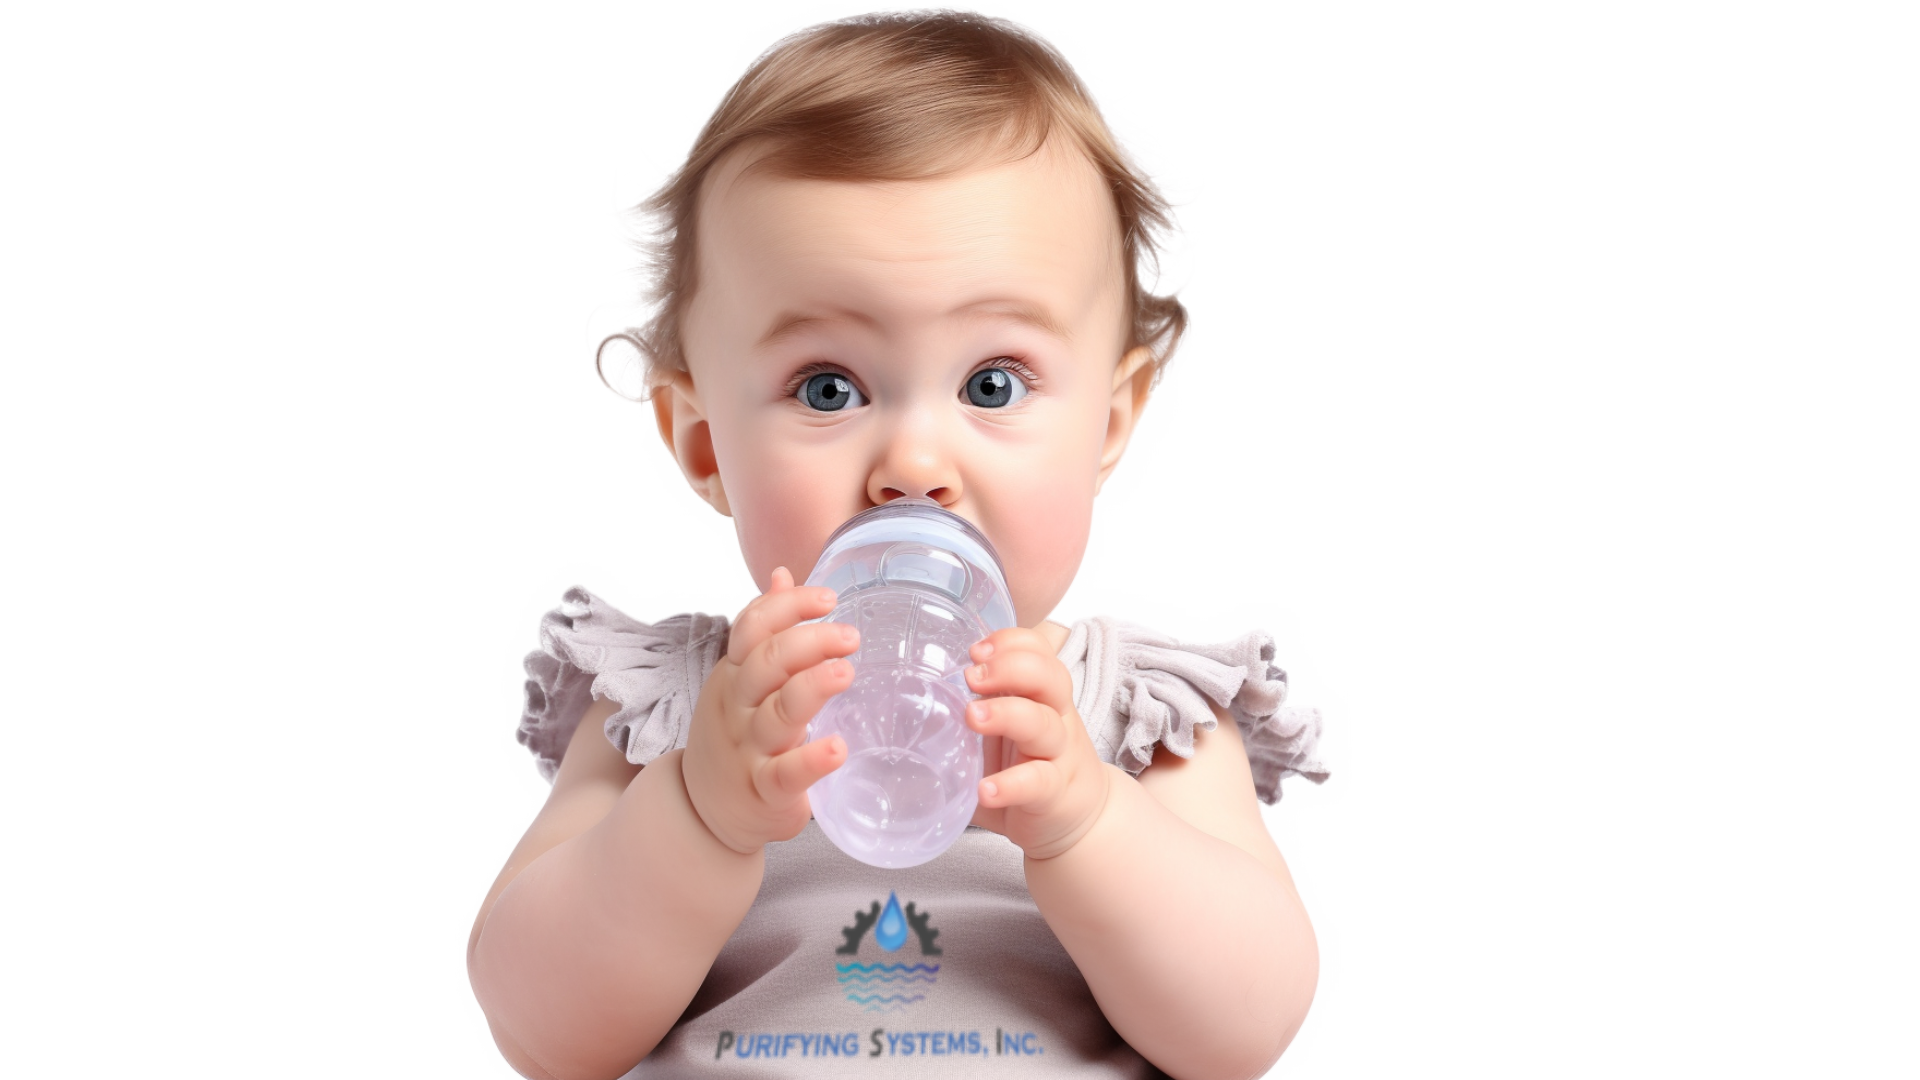 baby drinking water